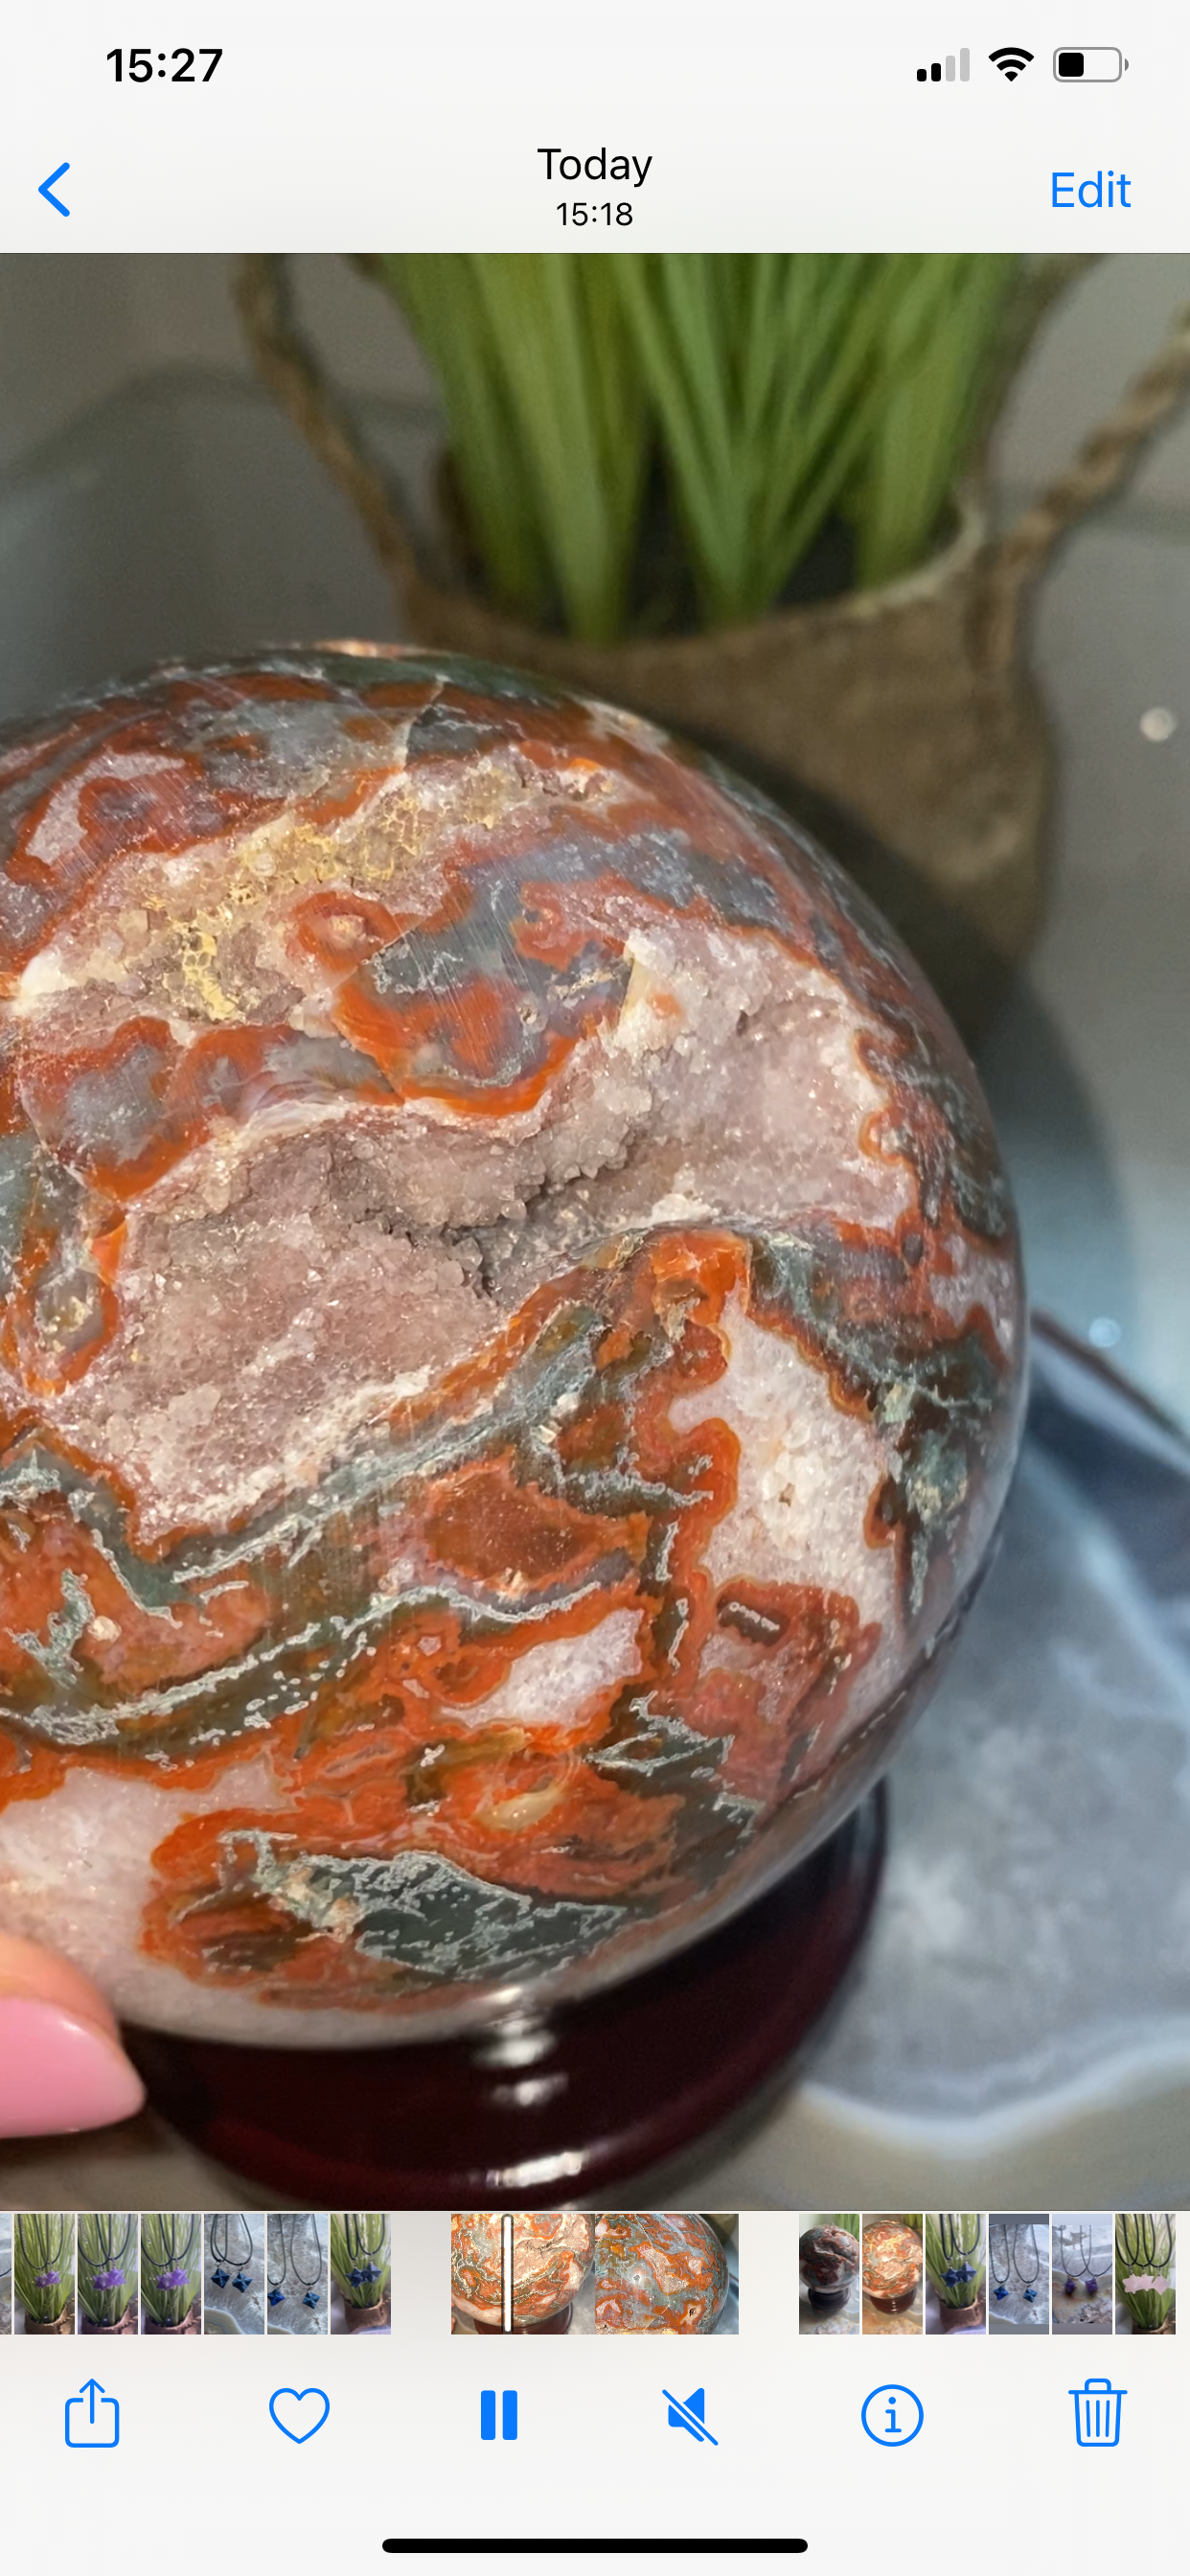 Red Moss Agate sphere